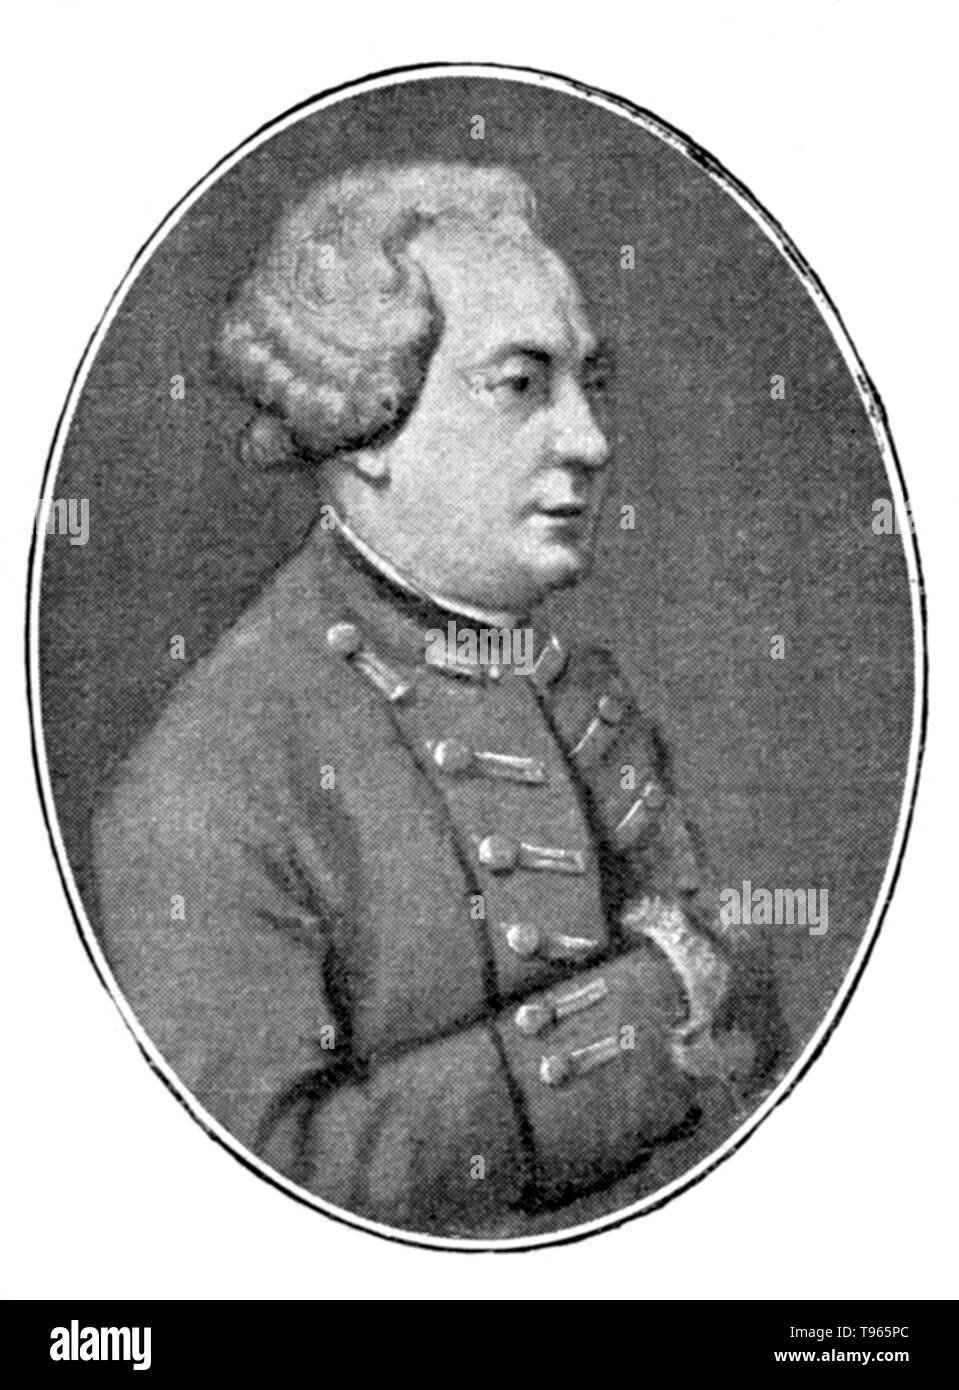 Charles-Geneviève-Louis-Auguste-André-Timothée d'Éon de Beaumont (October 5 1728 - May 21, 1810), usually known as the Chevalier d'Éon, was a French diplomat, spy, freemason and soldier who fought in the Seven Years' War. D'Éon had androgynous physical characteristics and natural abilities as a mimic, good features for a spy. Stock Photo